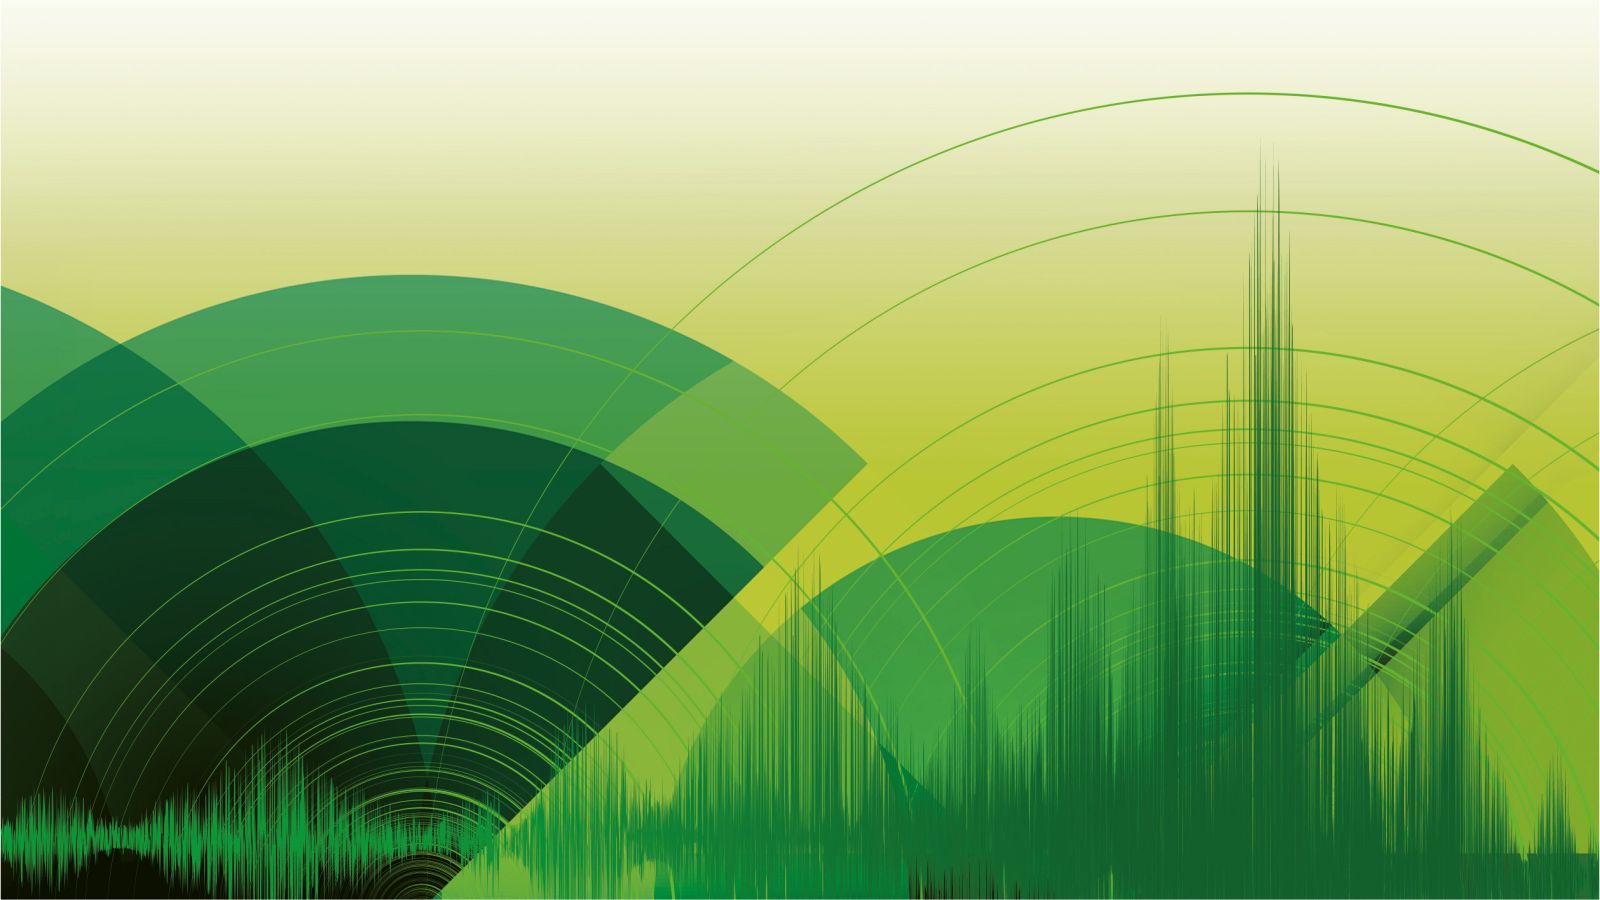 Abstract animated image with various green shapes and shades.